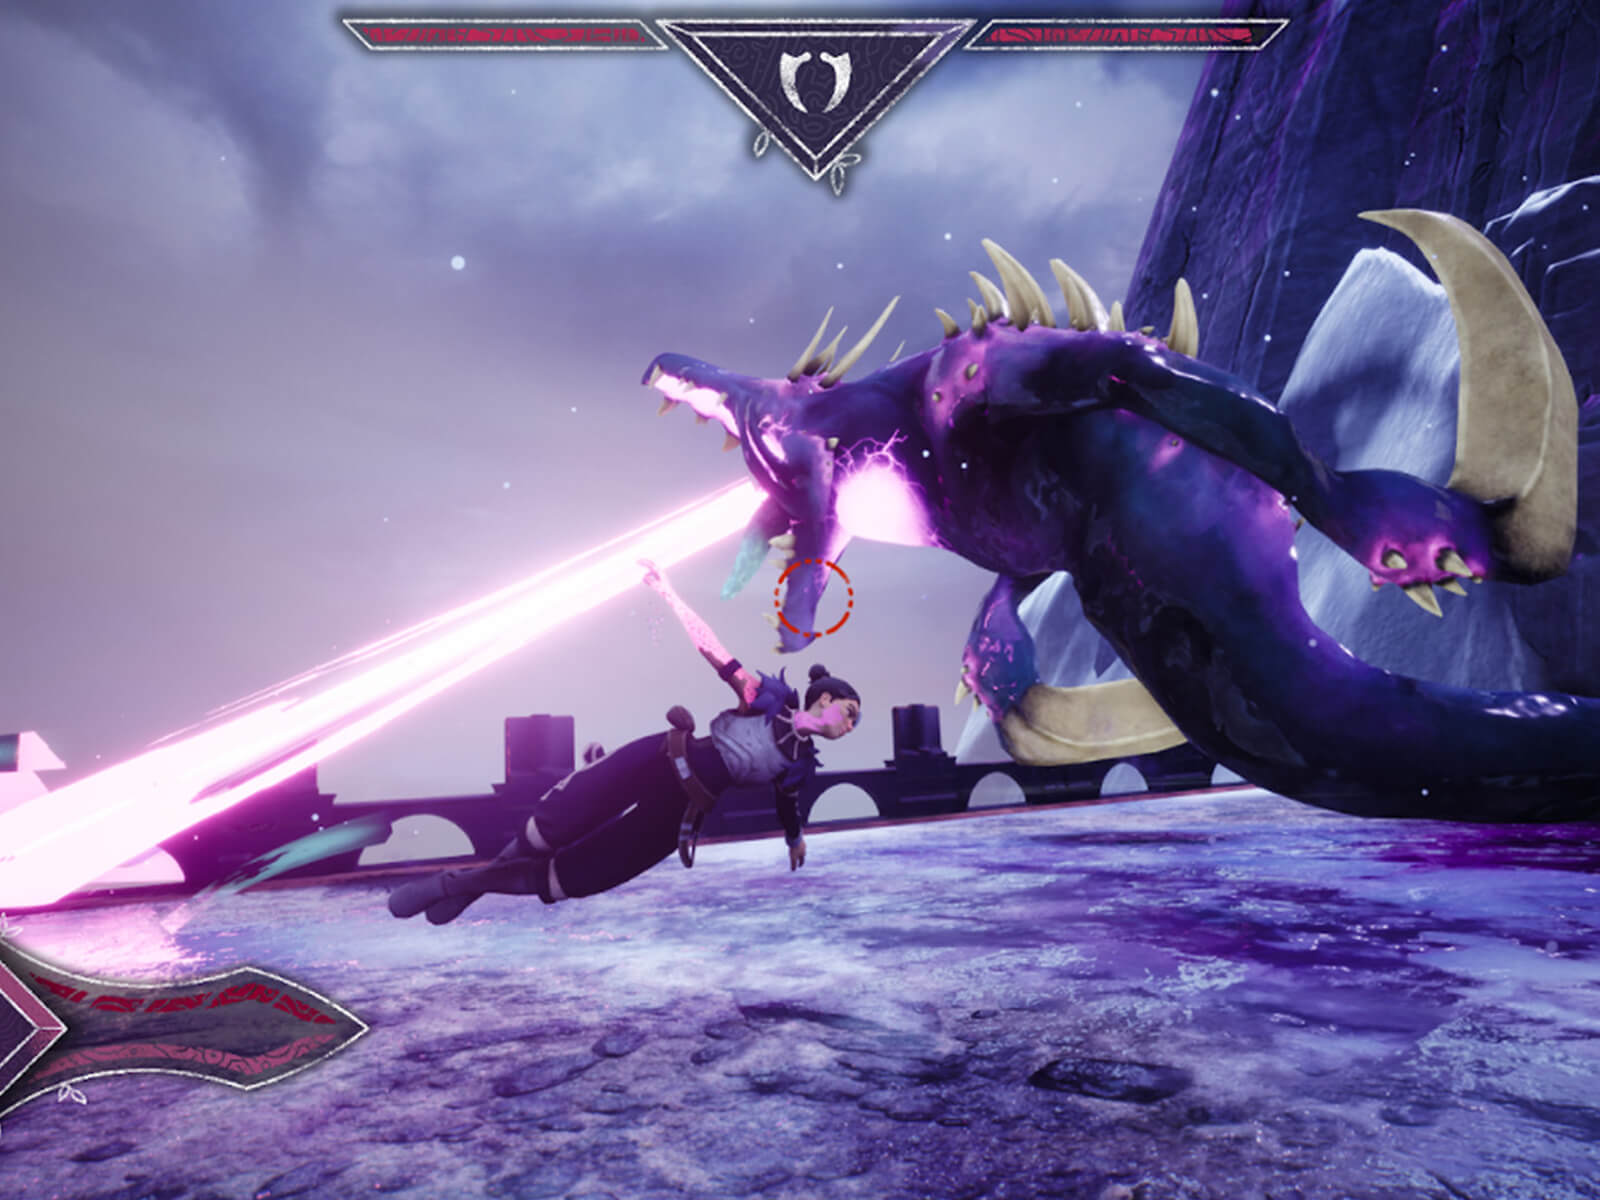 Cyrah dashes past a large spiky enemy shooting a beam from its mouth.